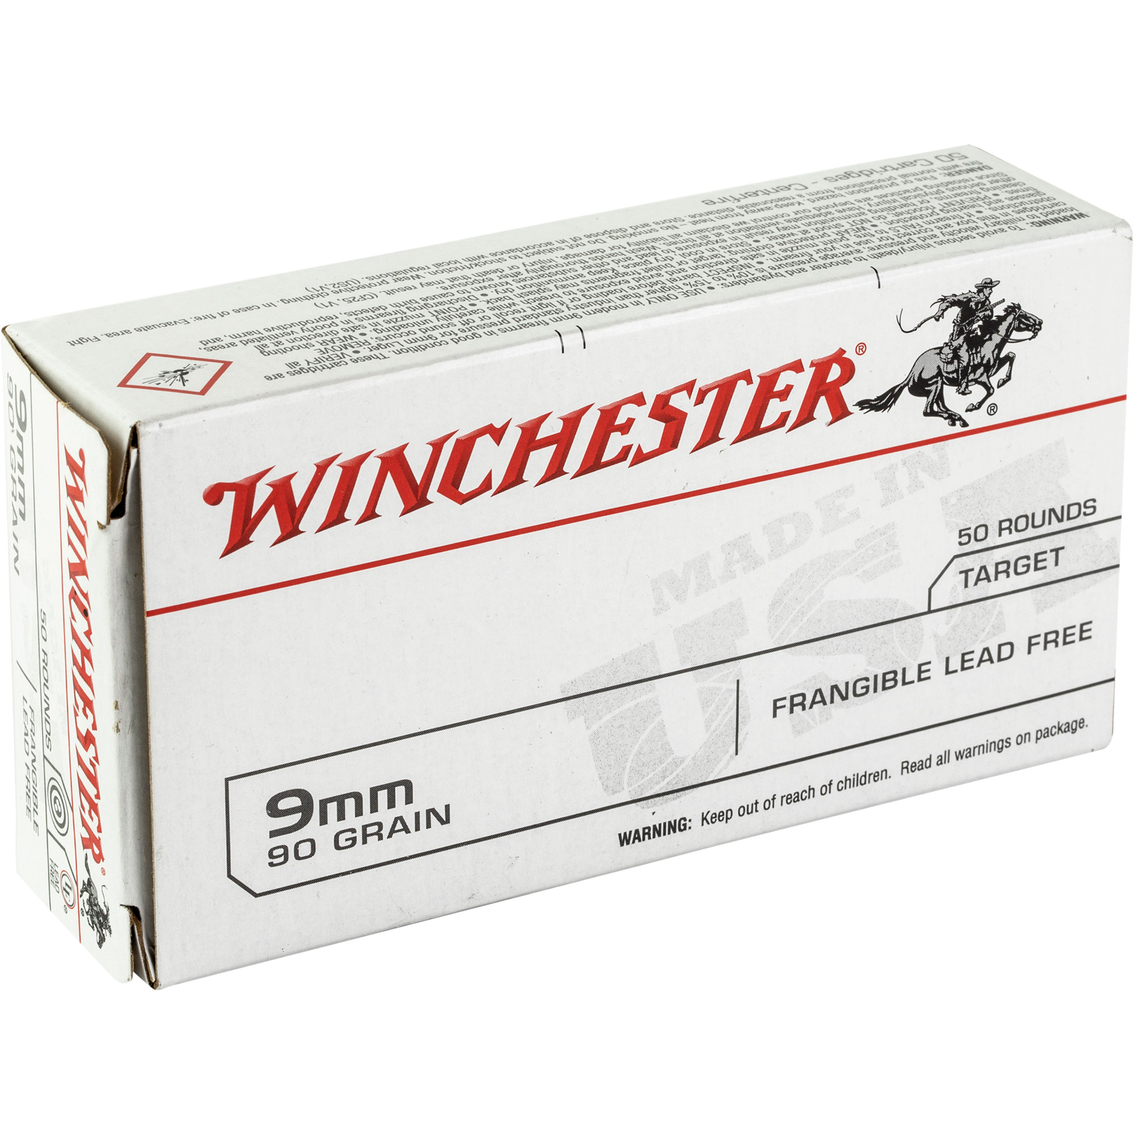 Winchester USA 9MM 90 Gr. Lead Free Frangible 50 Rounds - Image 2 of 4